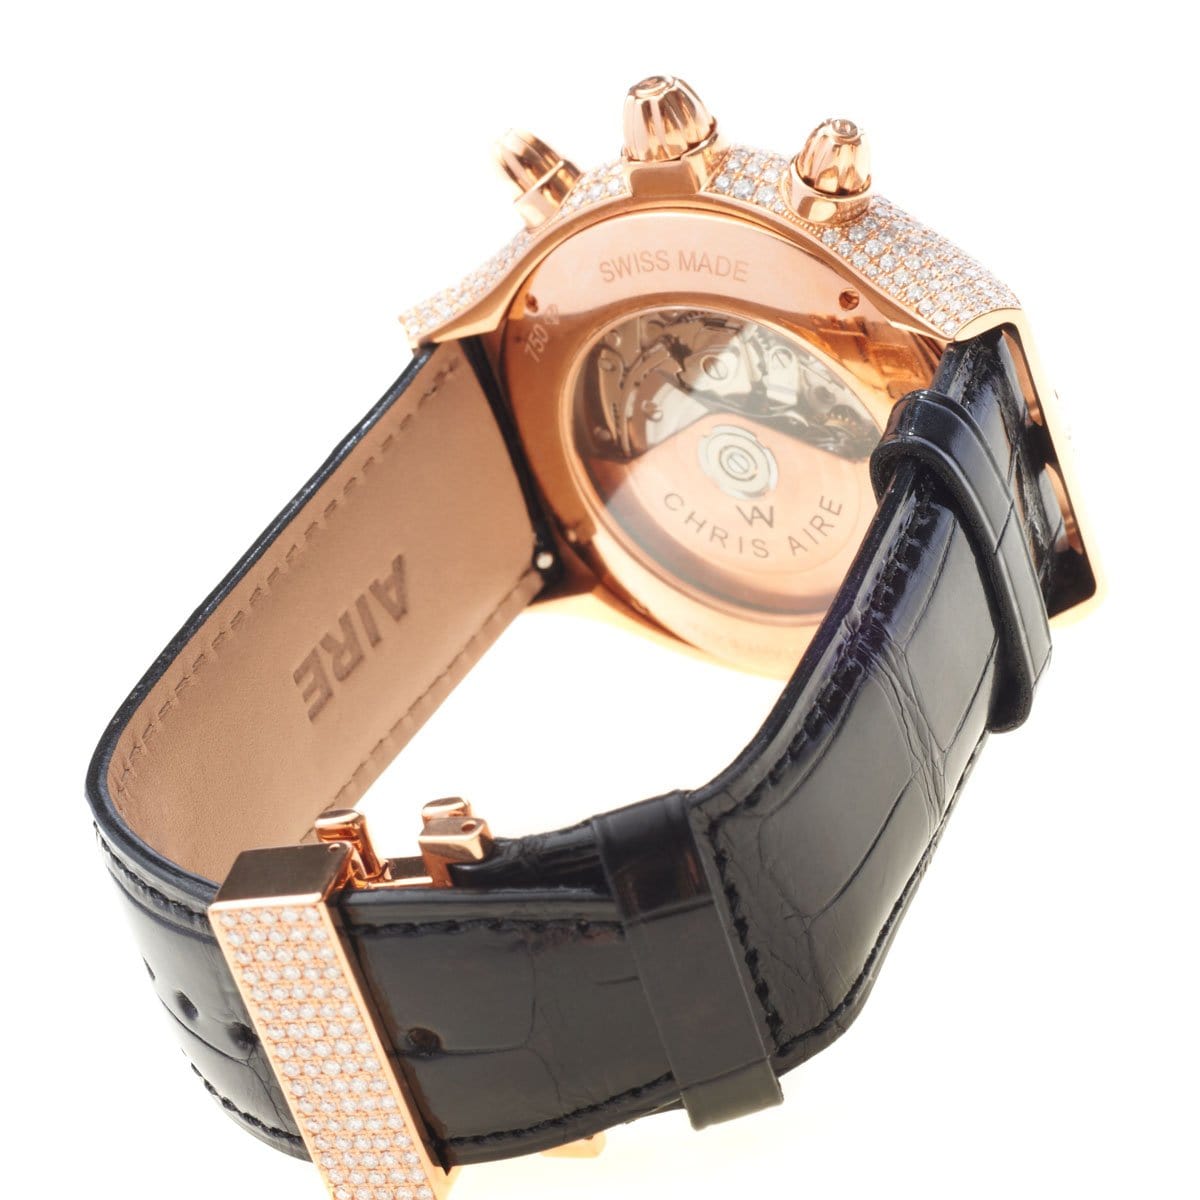 CHRIS AIRE WATCH - PARLAY CHRONOMATIC - Chris Aire Fine Jewelry & Timepieces